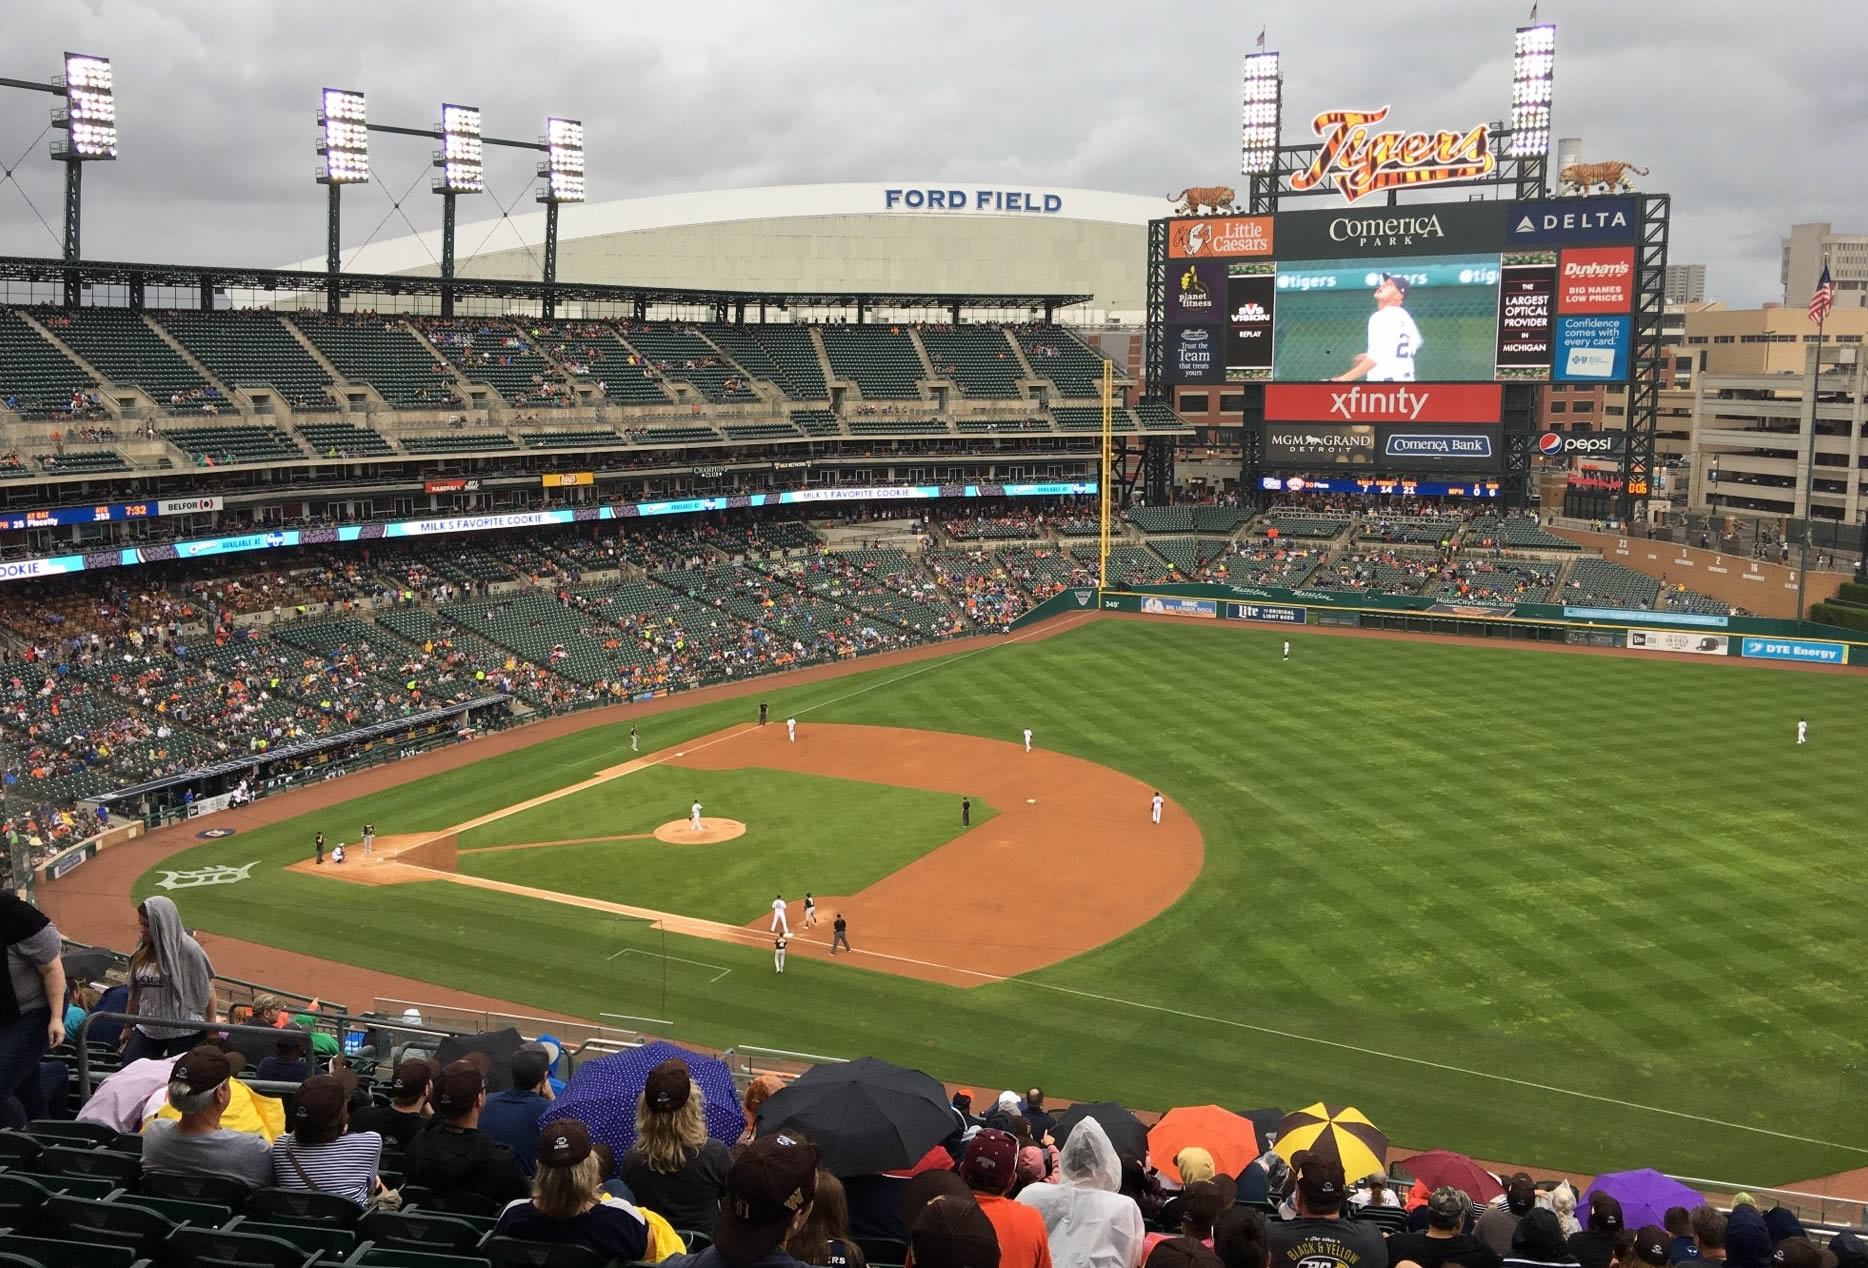 section 215, row 16 seat view  for baseball - comerica park